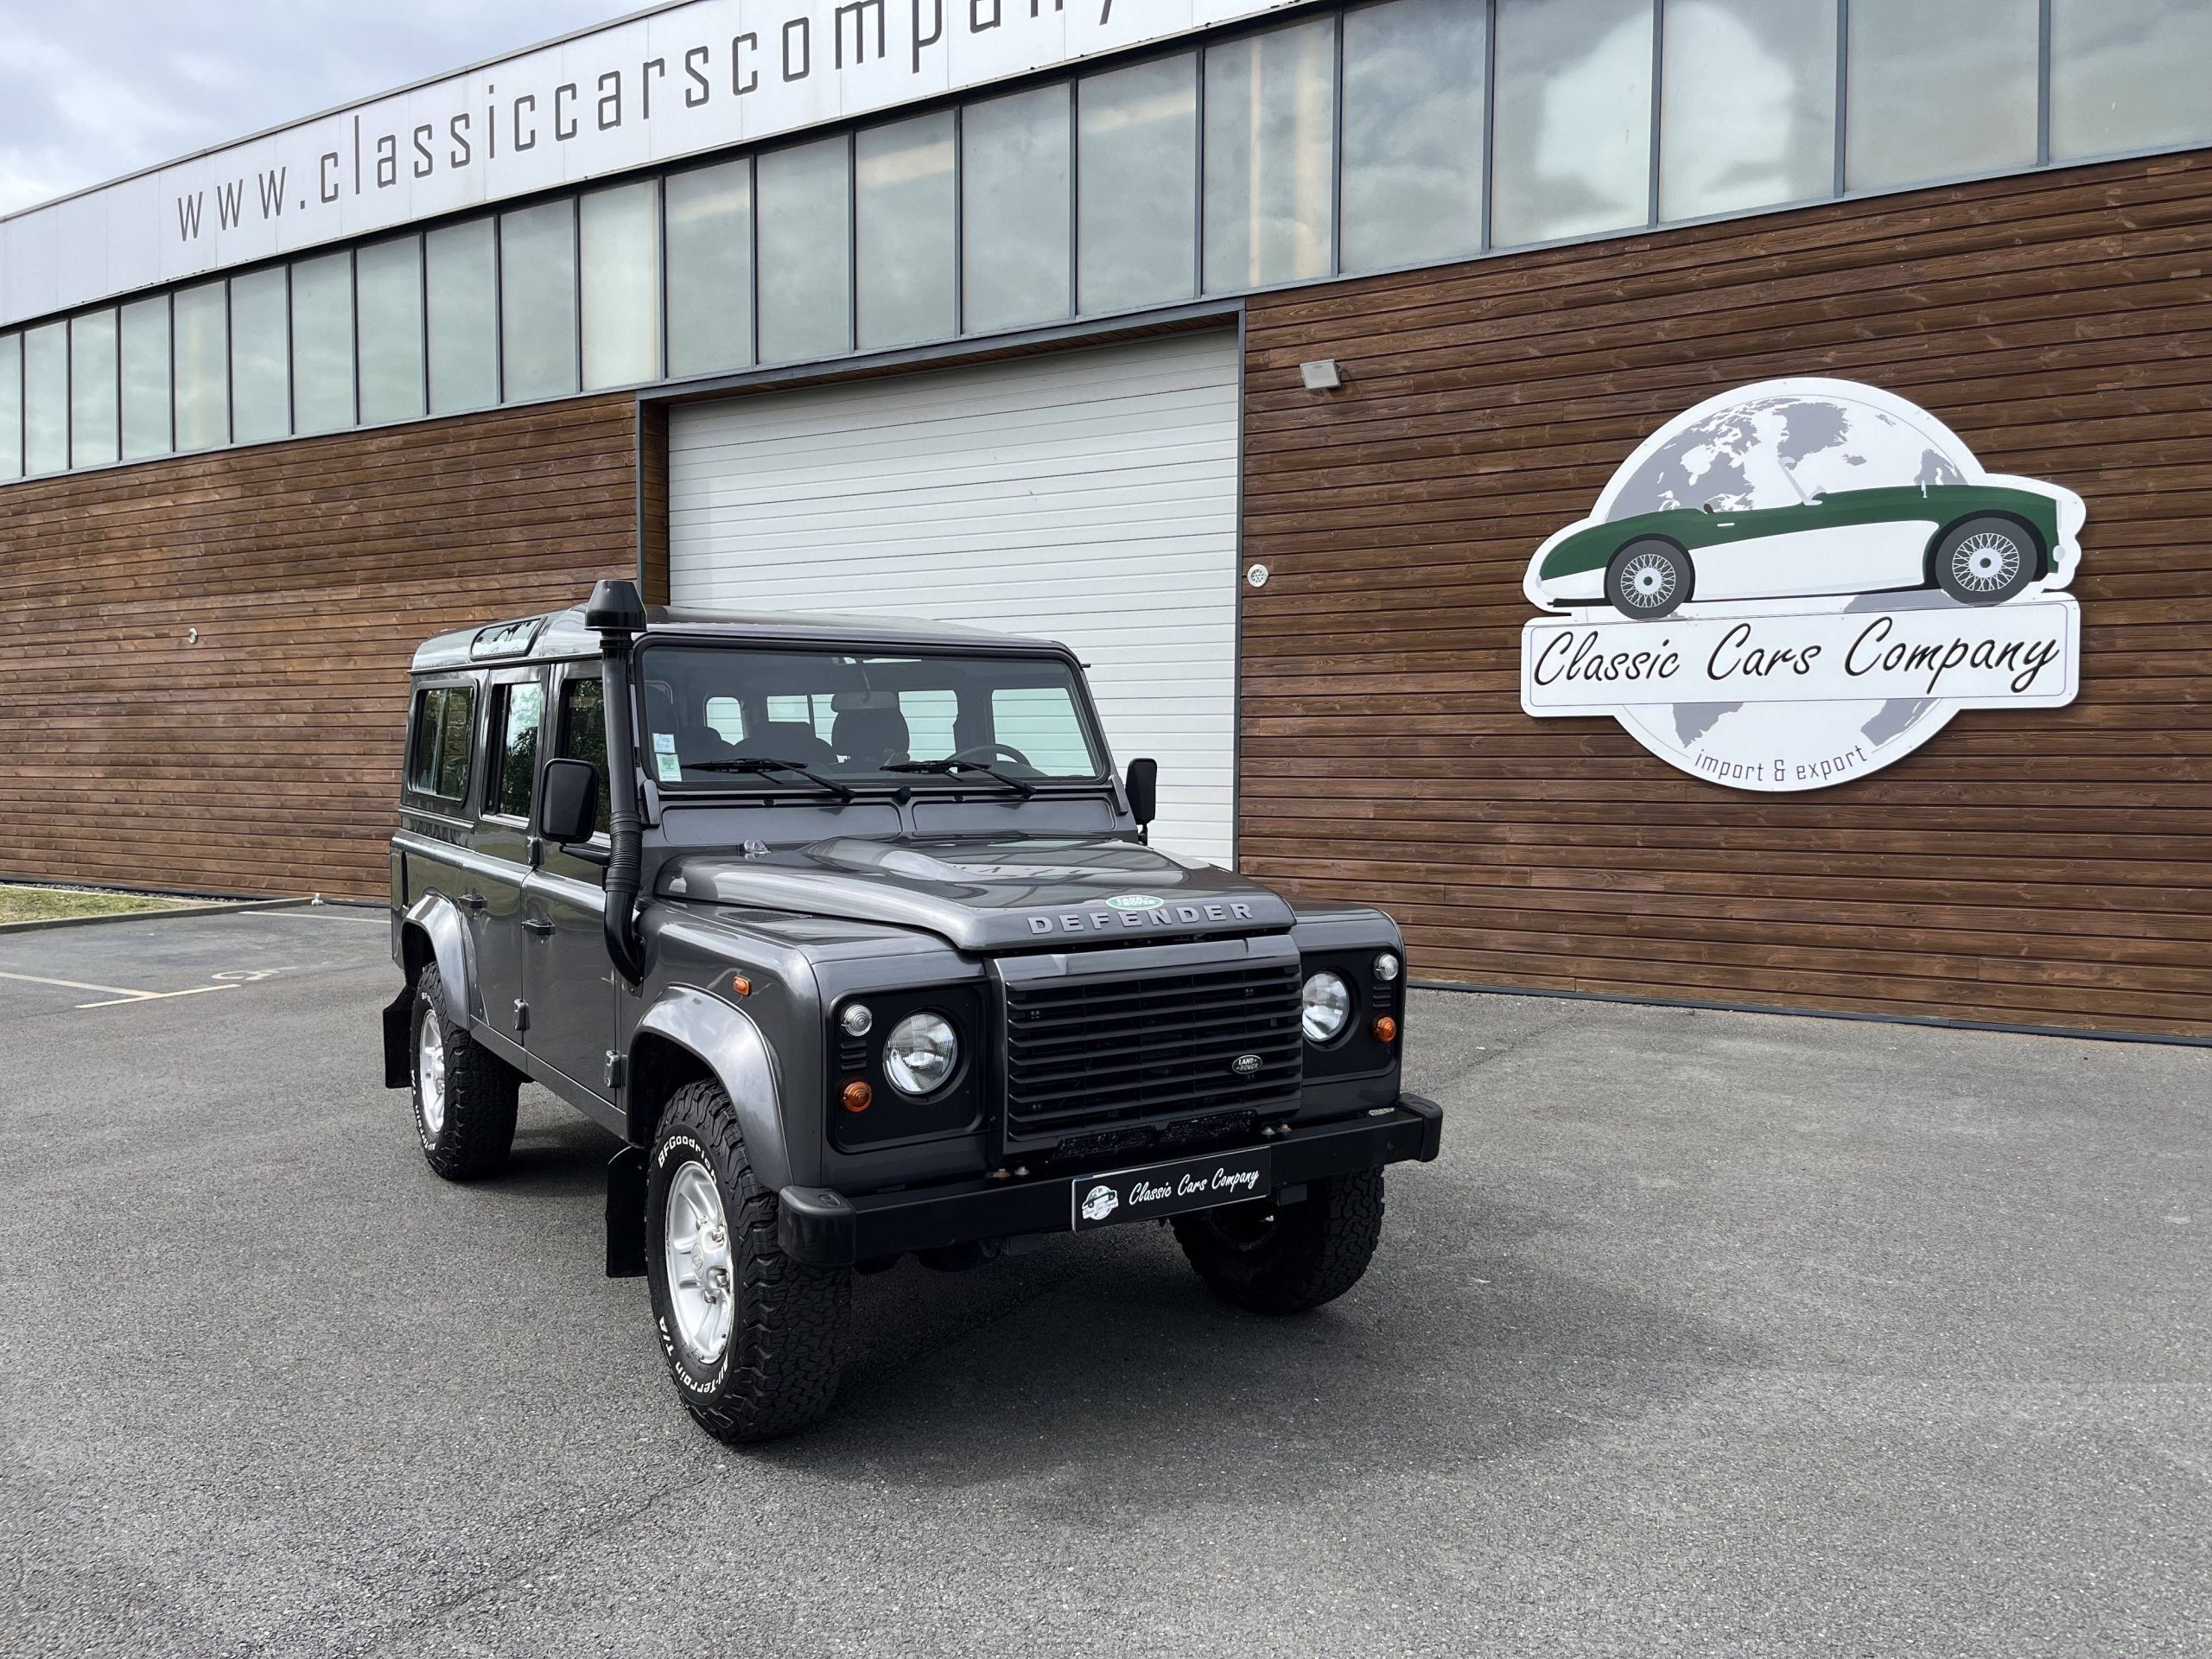 Land Rover Defender 110 TD4 – Classic Cars Company